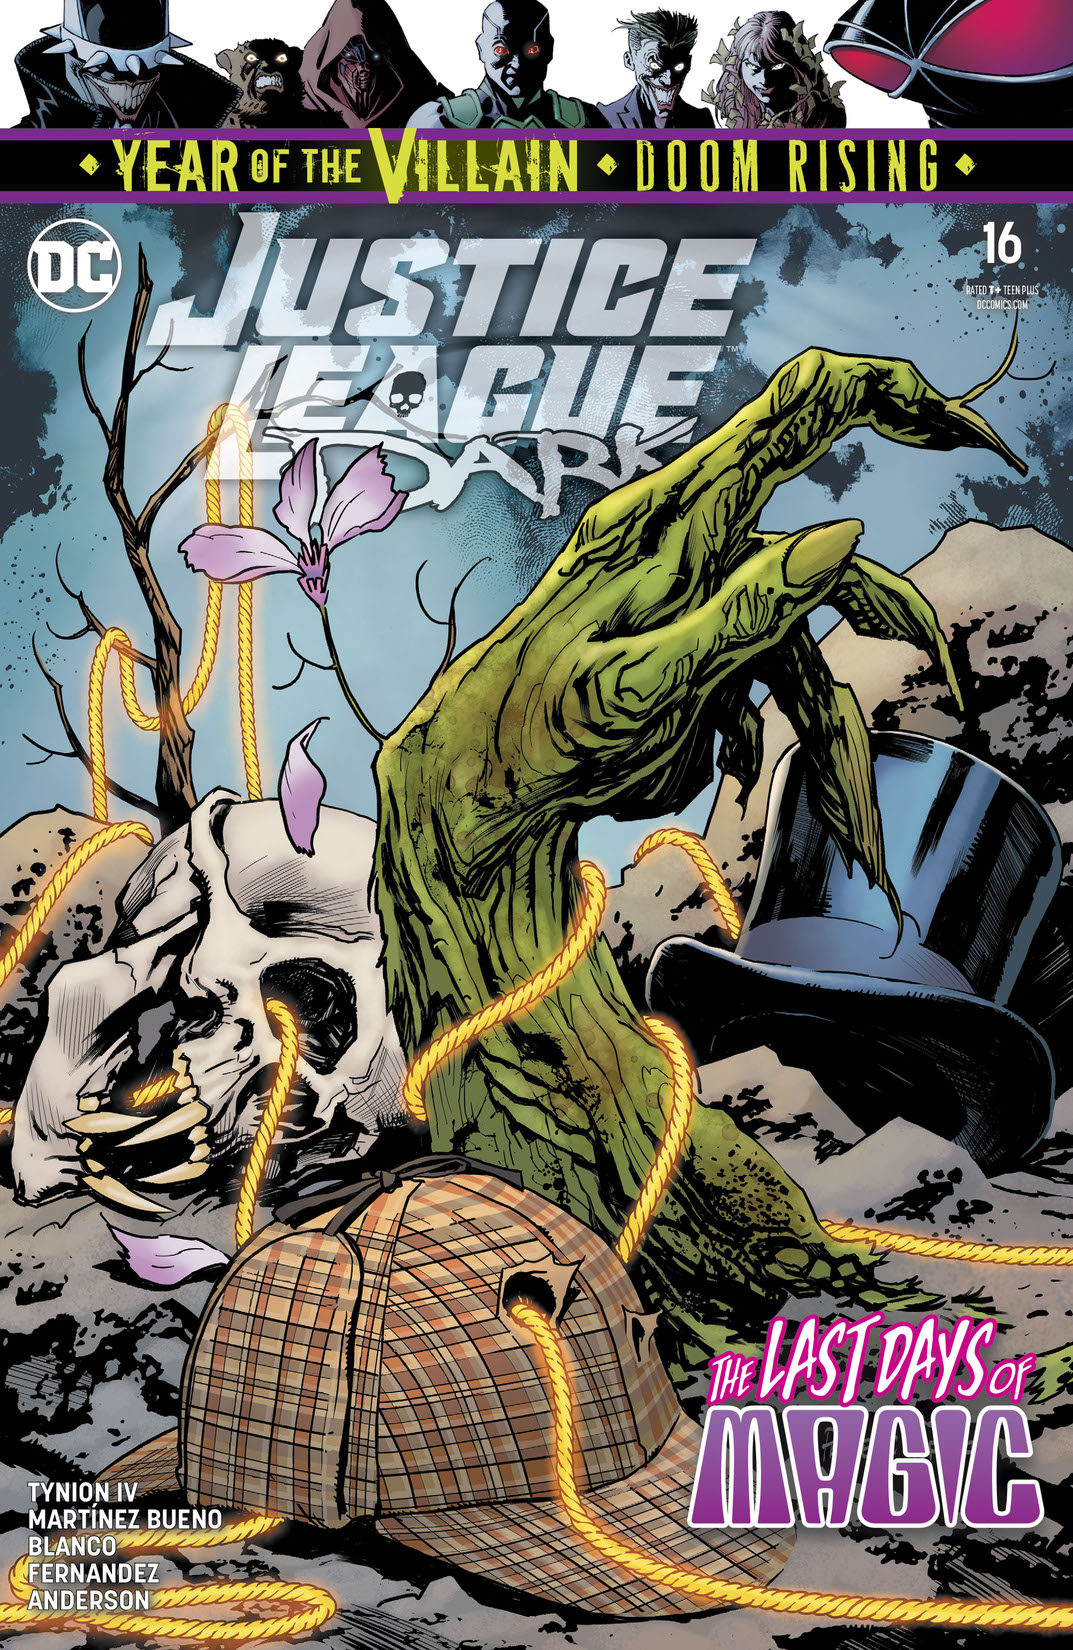 Justice League Dark (2018-) #16 preview images